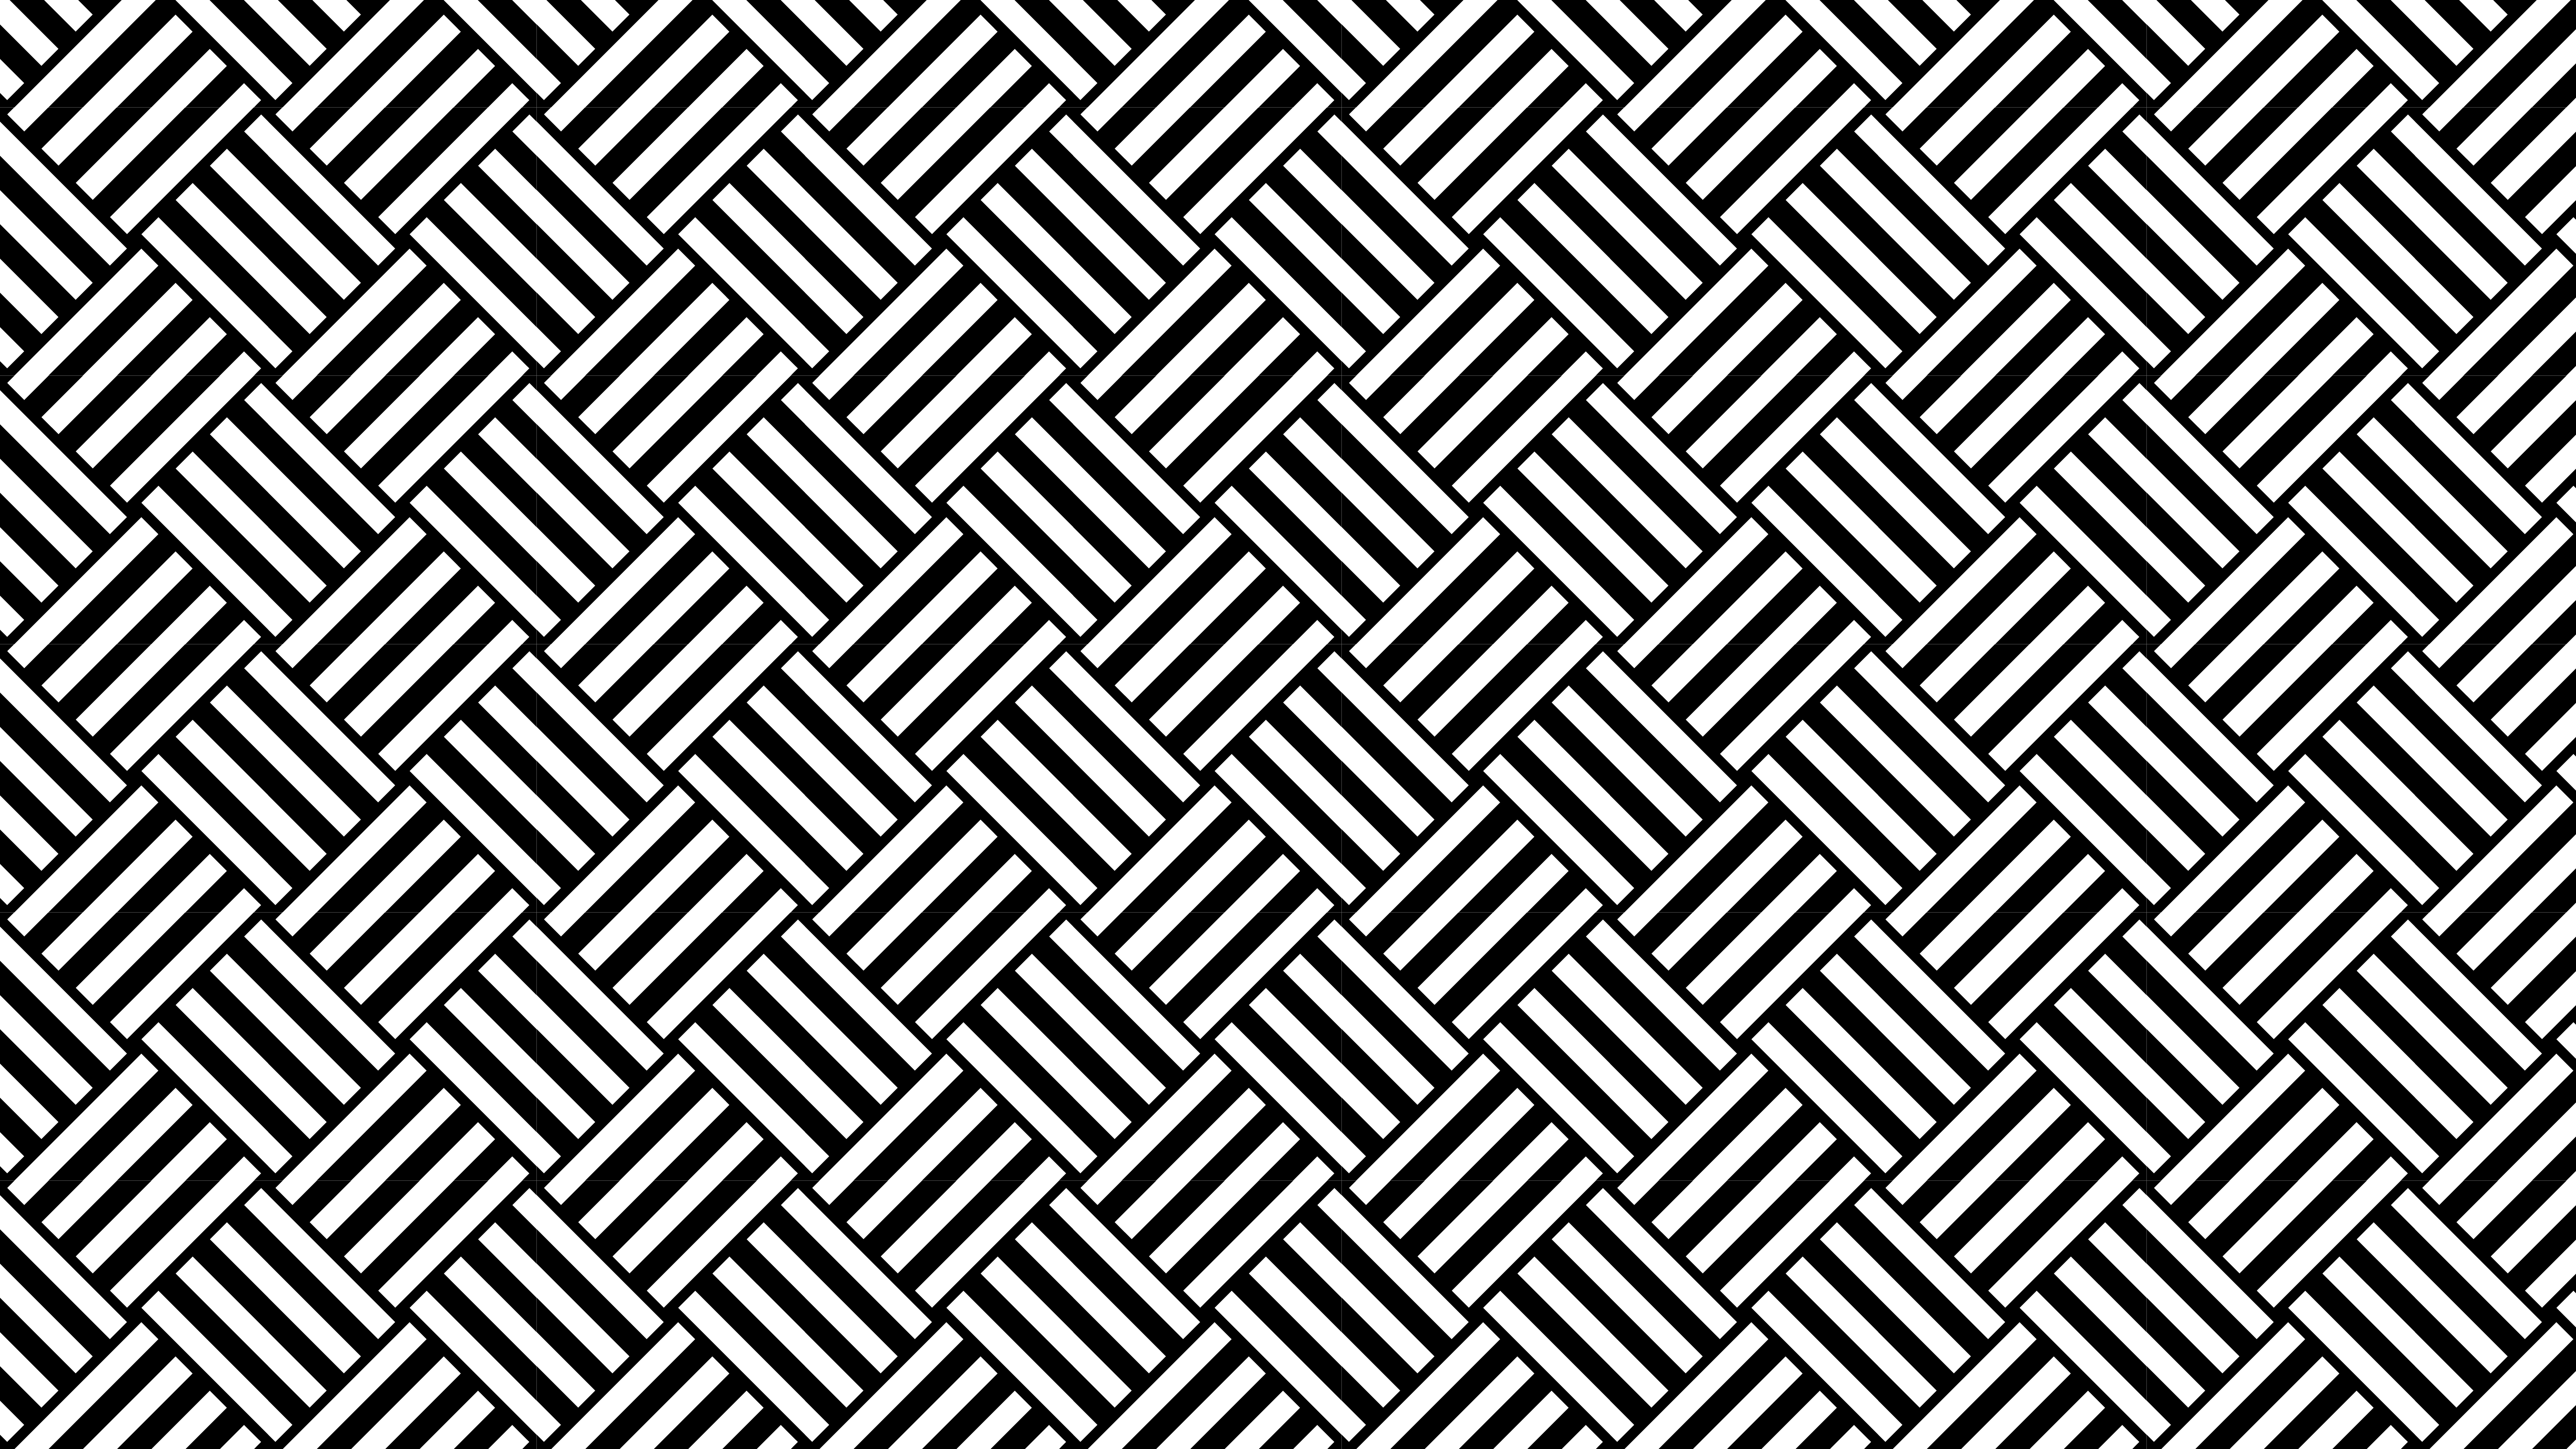 Free Black and White Seamless Stripes Background Pattern Vector Art